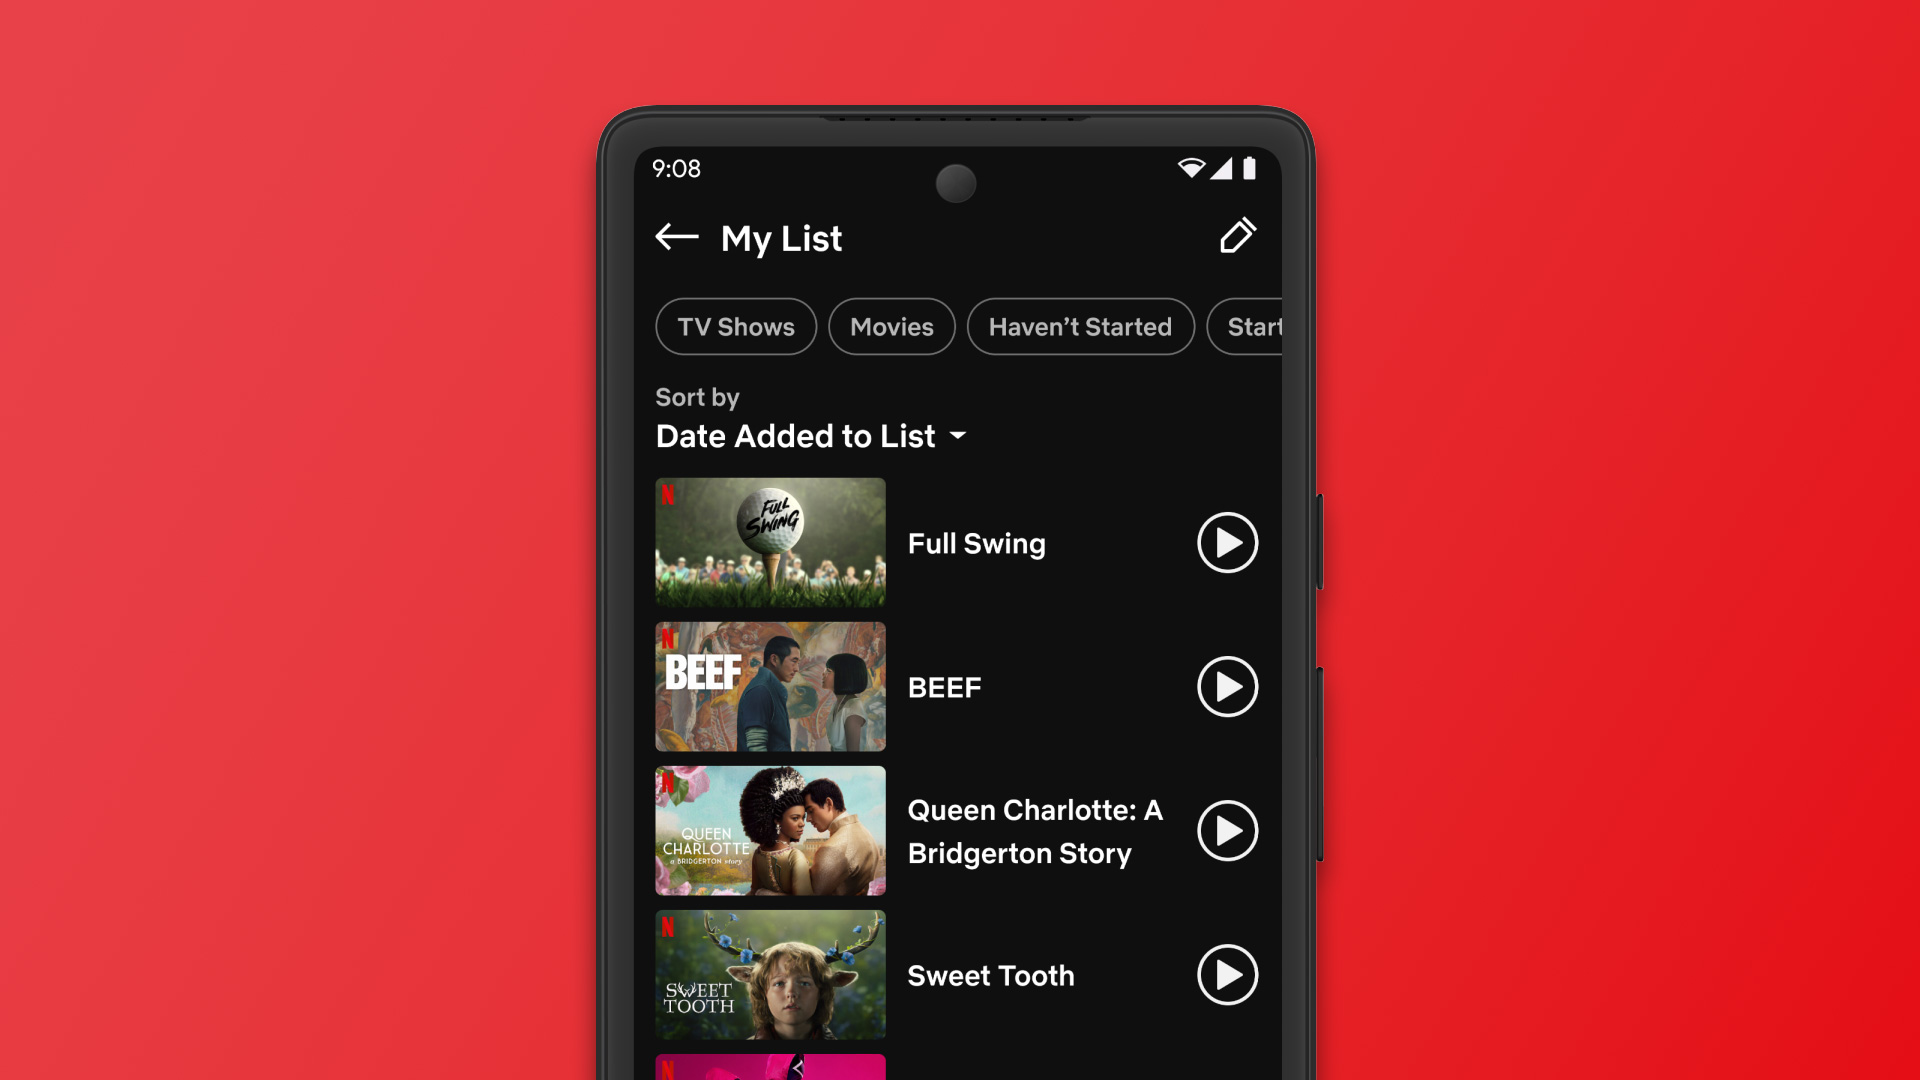 Netflix makes it easier for users to navigate through 'My List' on its mobile app.